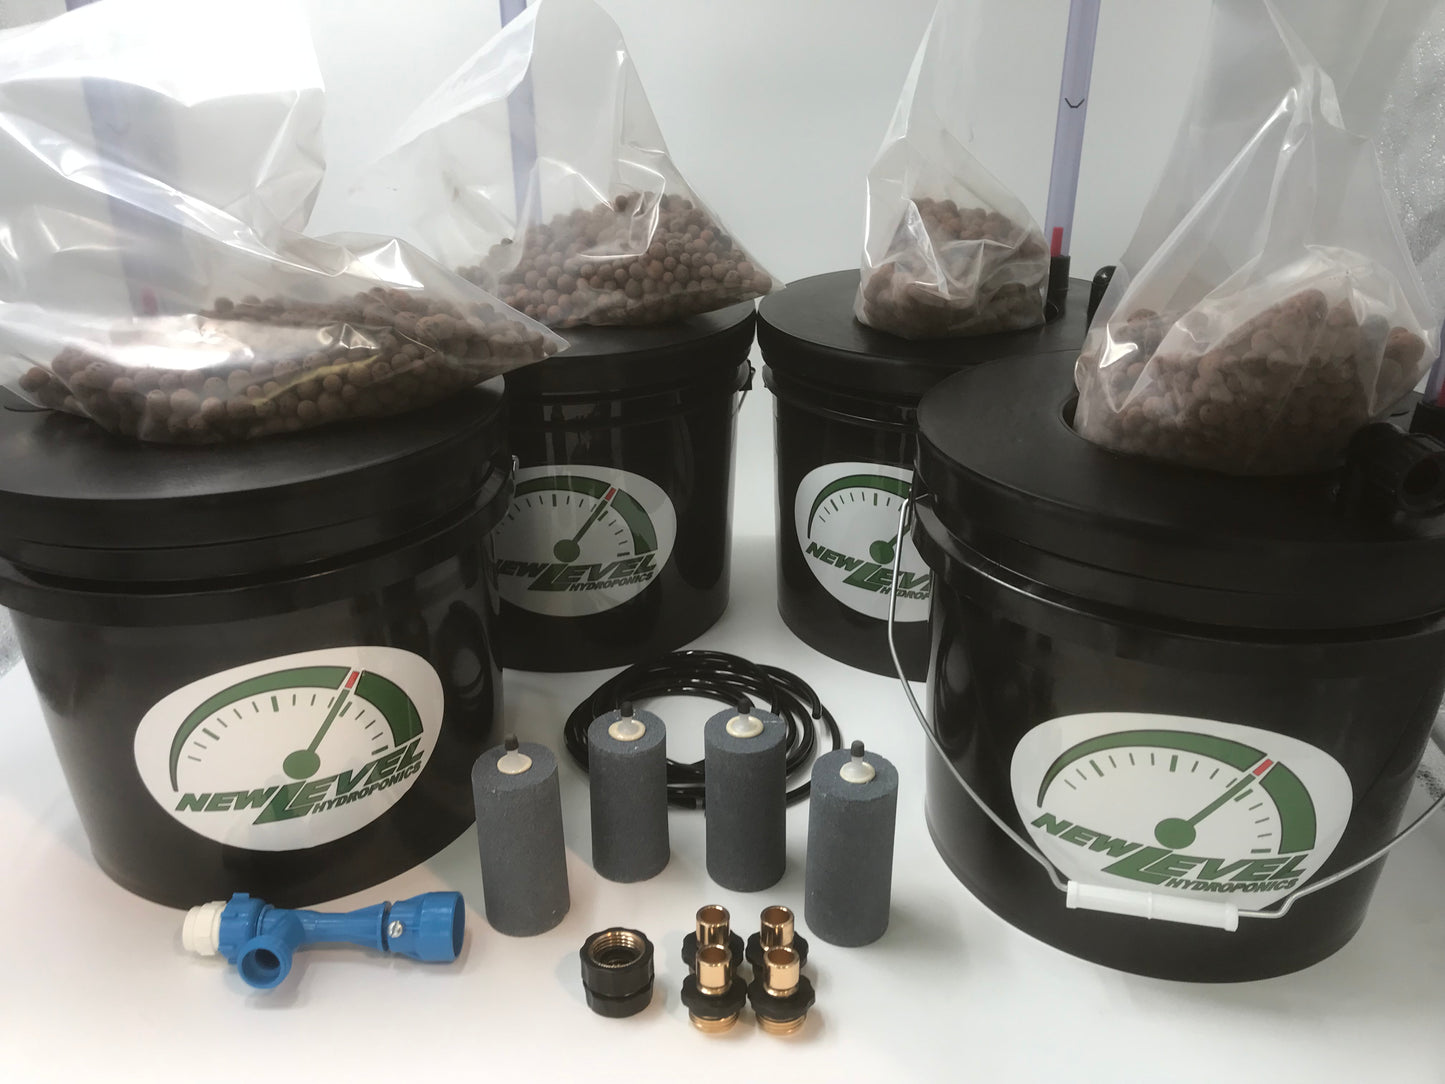 4 BUCKET DELUXE DWC SYSTEM -3.5 or 5 GALLON